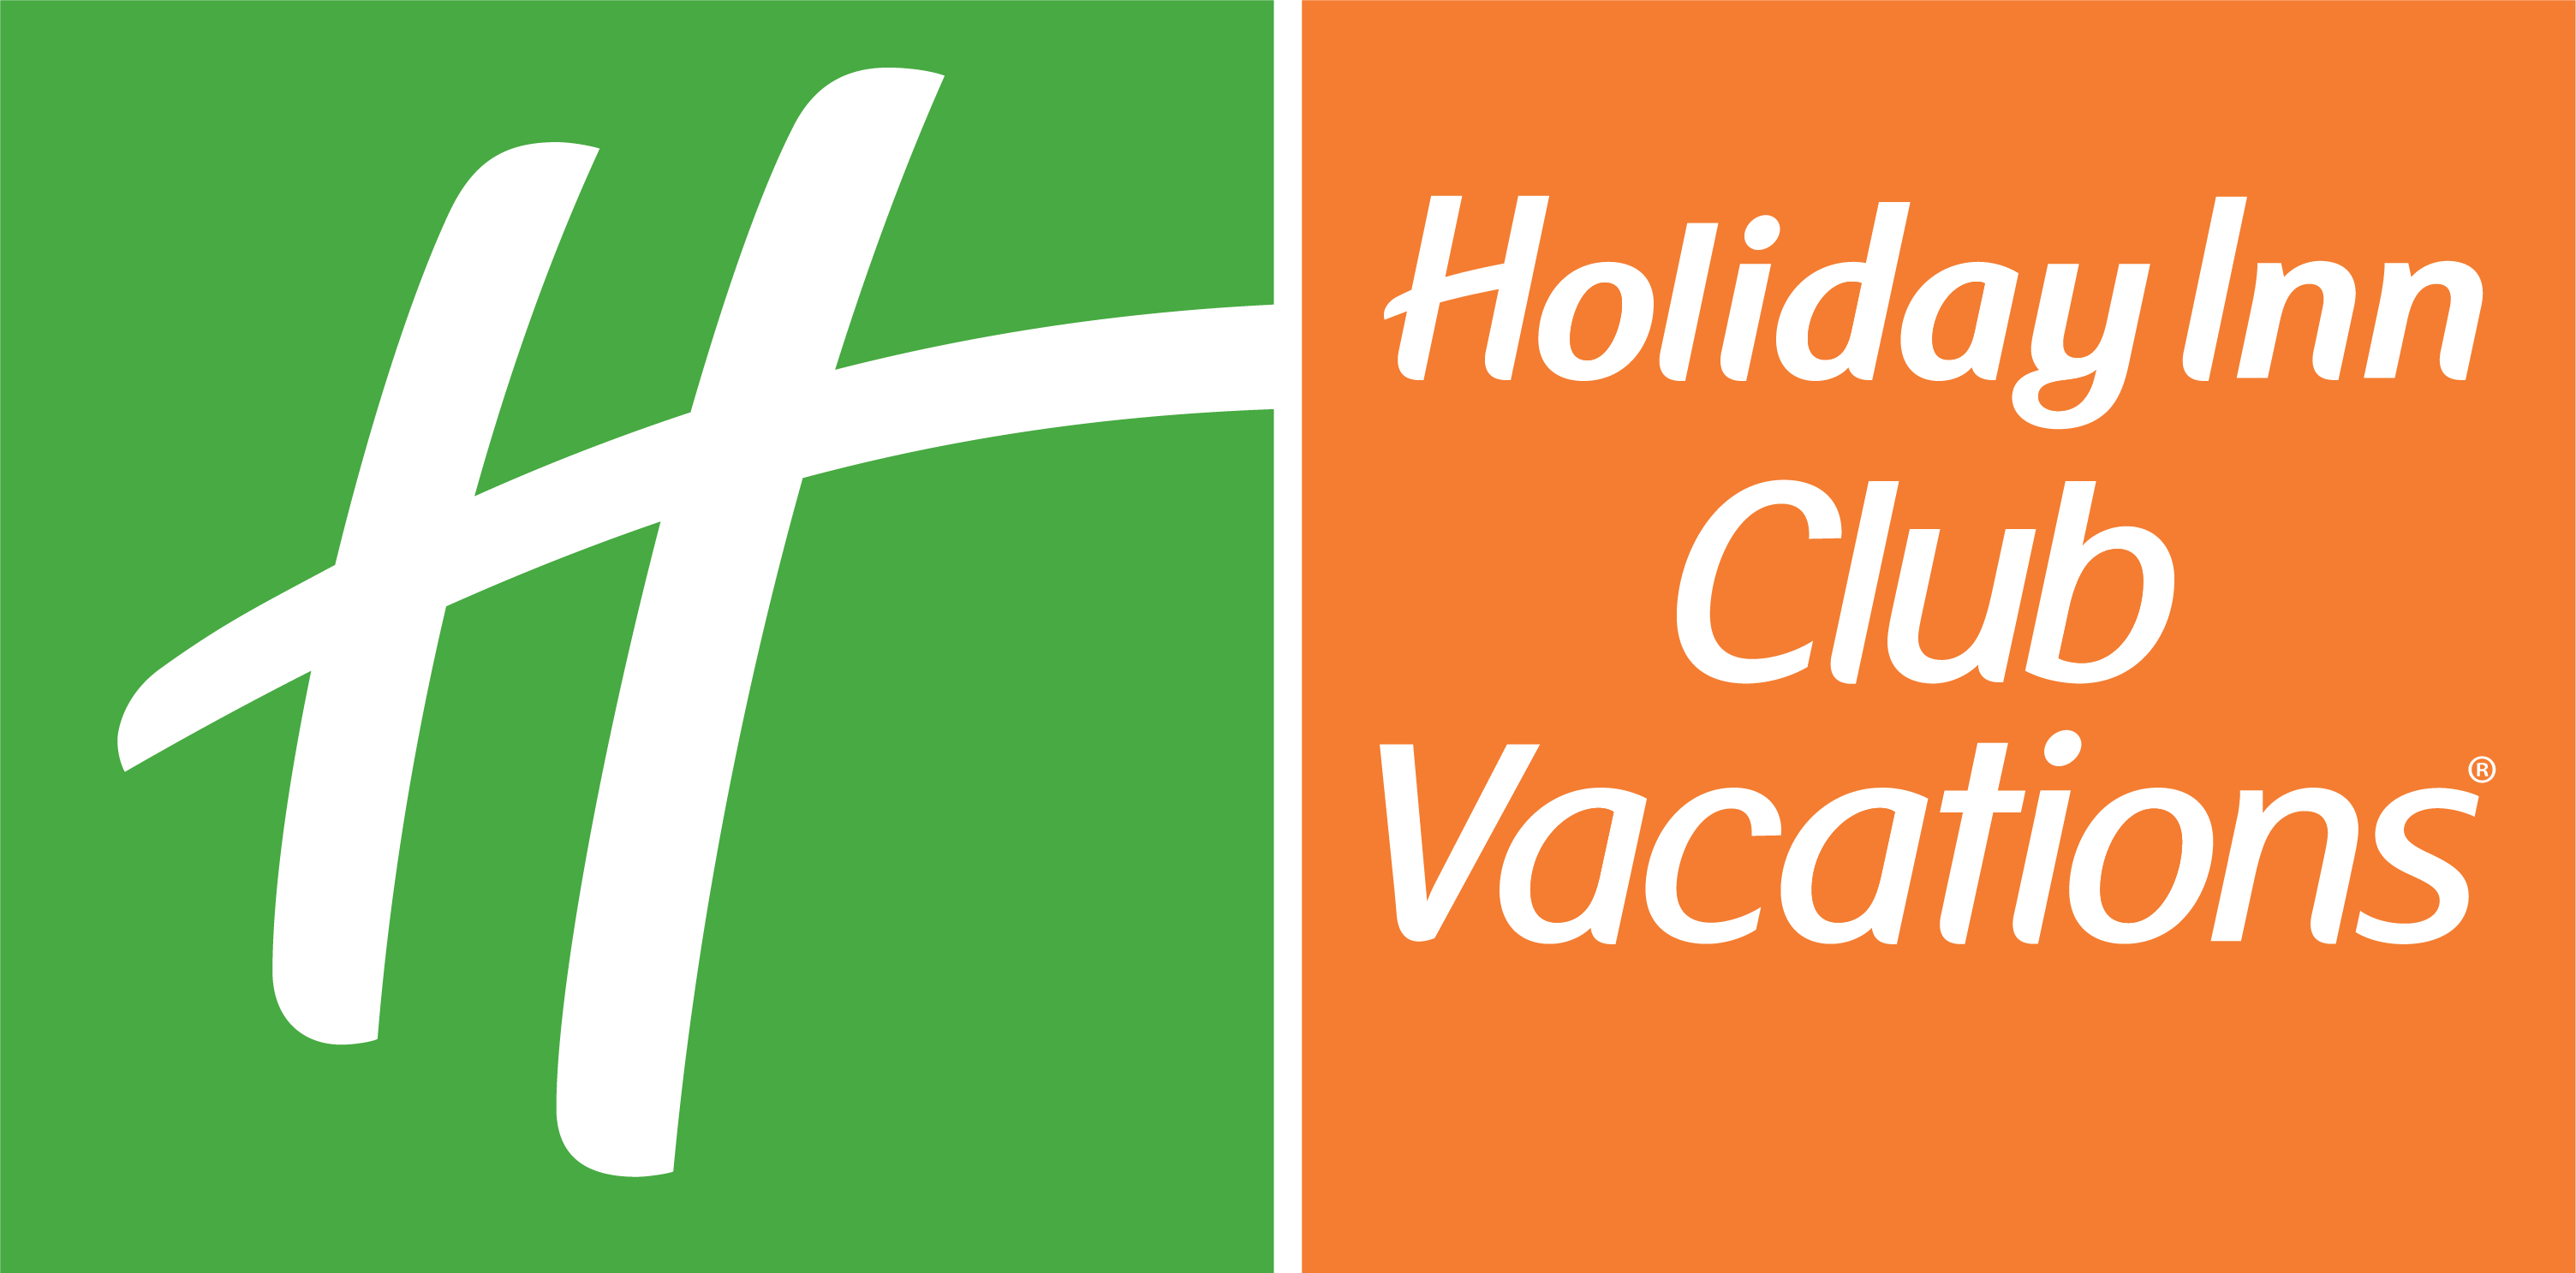 Vacation Ownership & Resorts for Families 